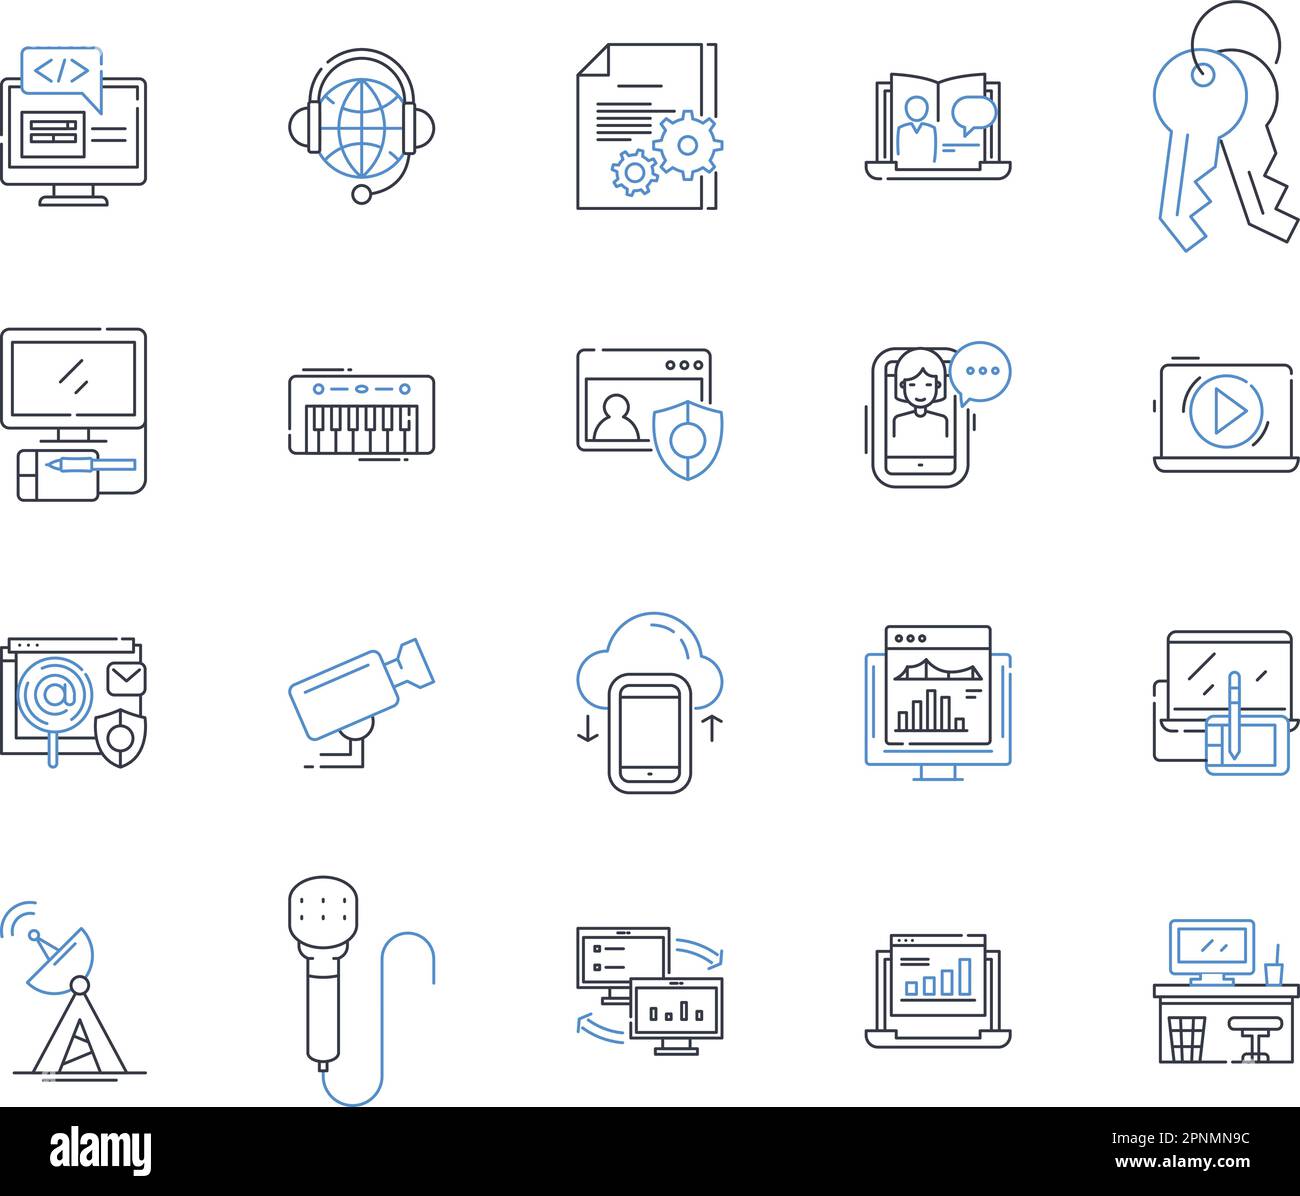 Electronic compnts industry line icons collection. Silicon, Transistor, Capacitor, Resistor, Diode, Microchip, PCB vector and linear illustration Stock Vector